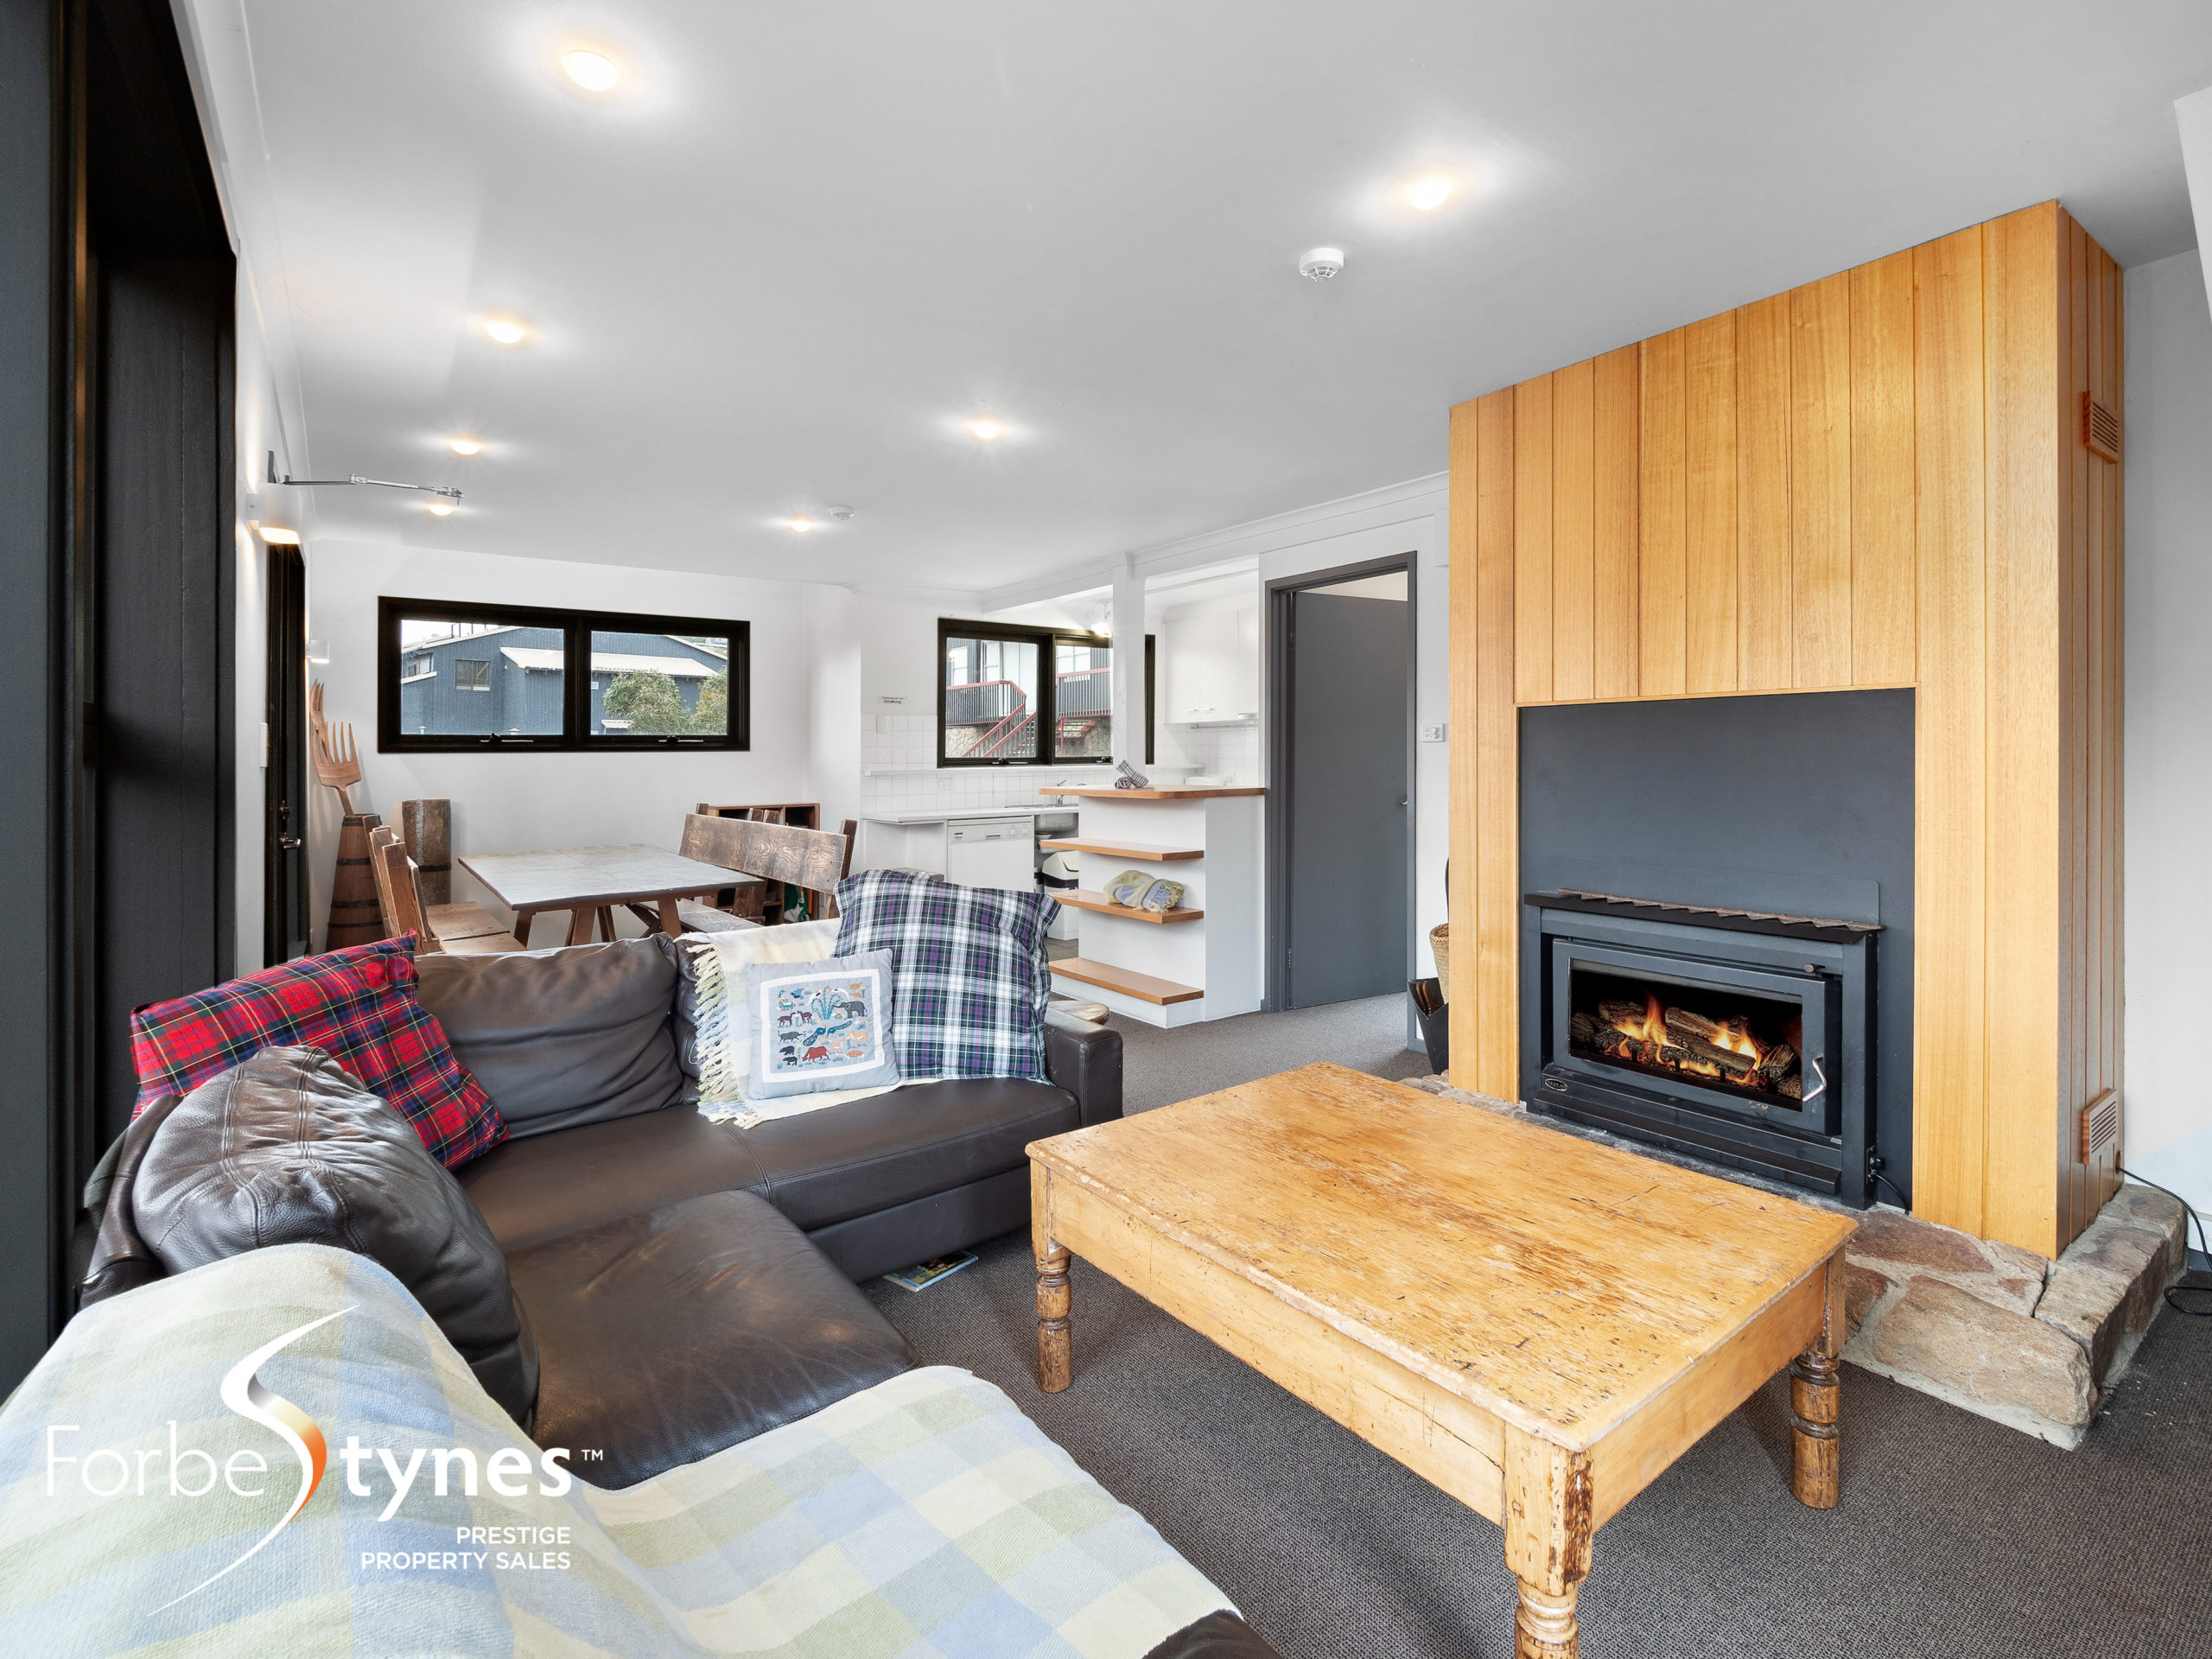 Large 5 Bedroom Lodge in the heart of Thredbo’s Central Village – Athol Lodge<br>$3,900,000